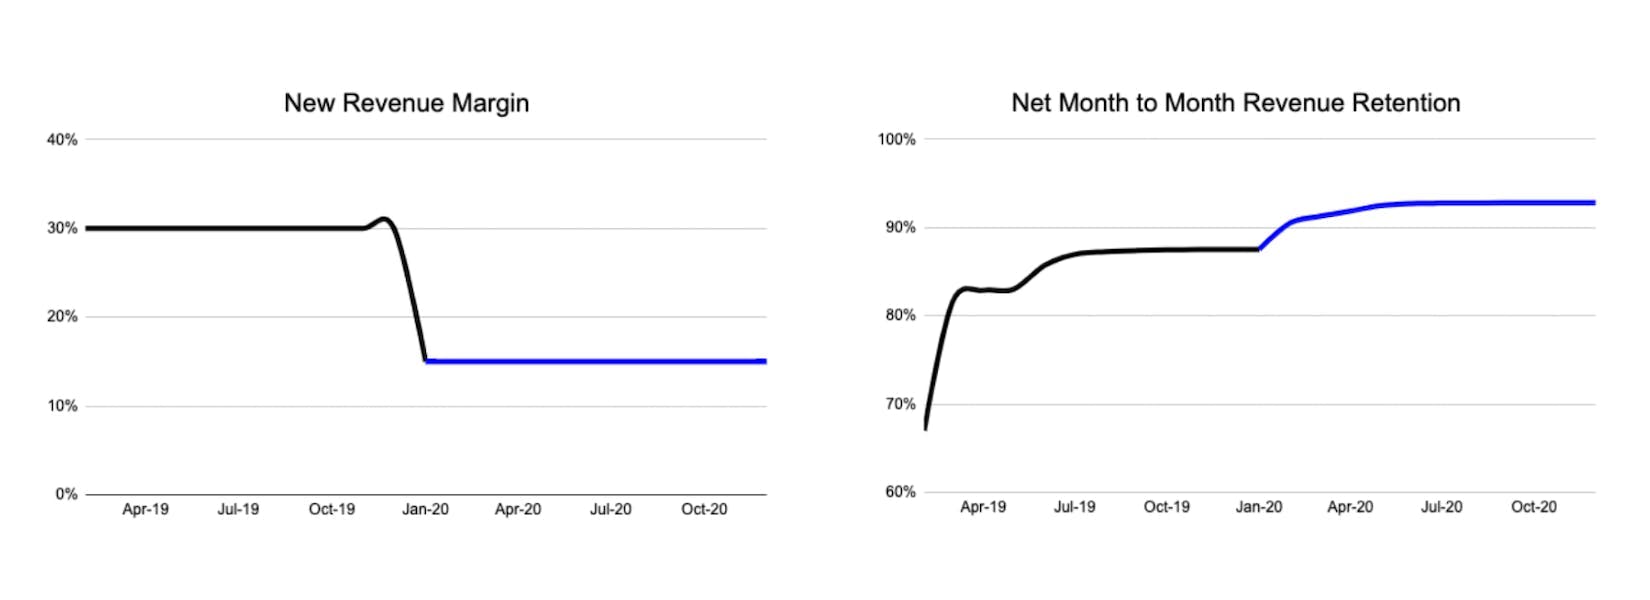 Graph of new revenue margin and net month to month revenue retention